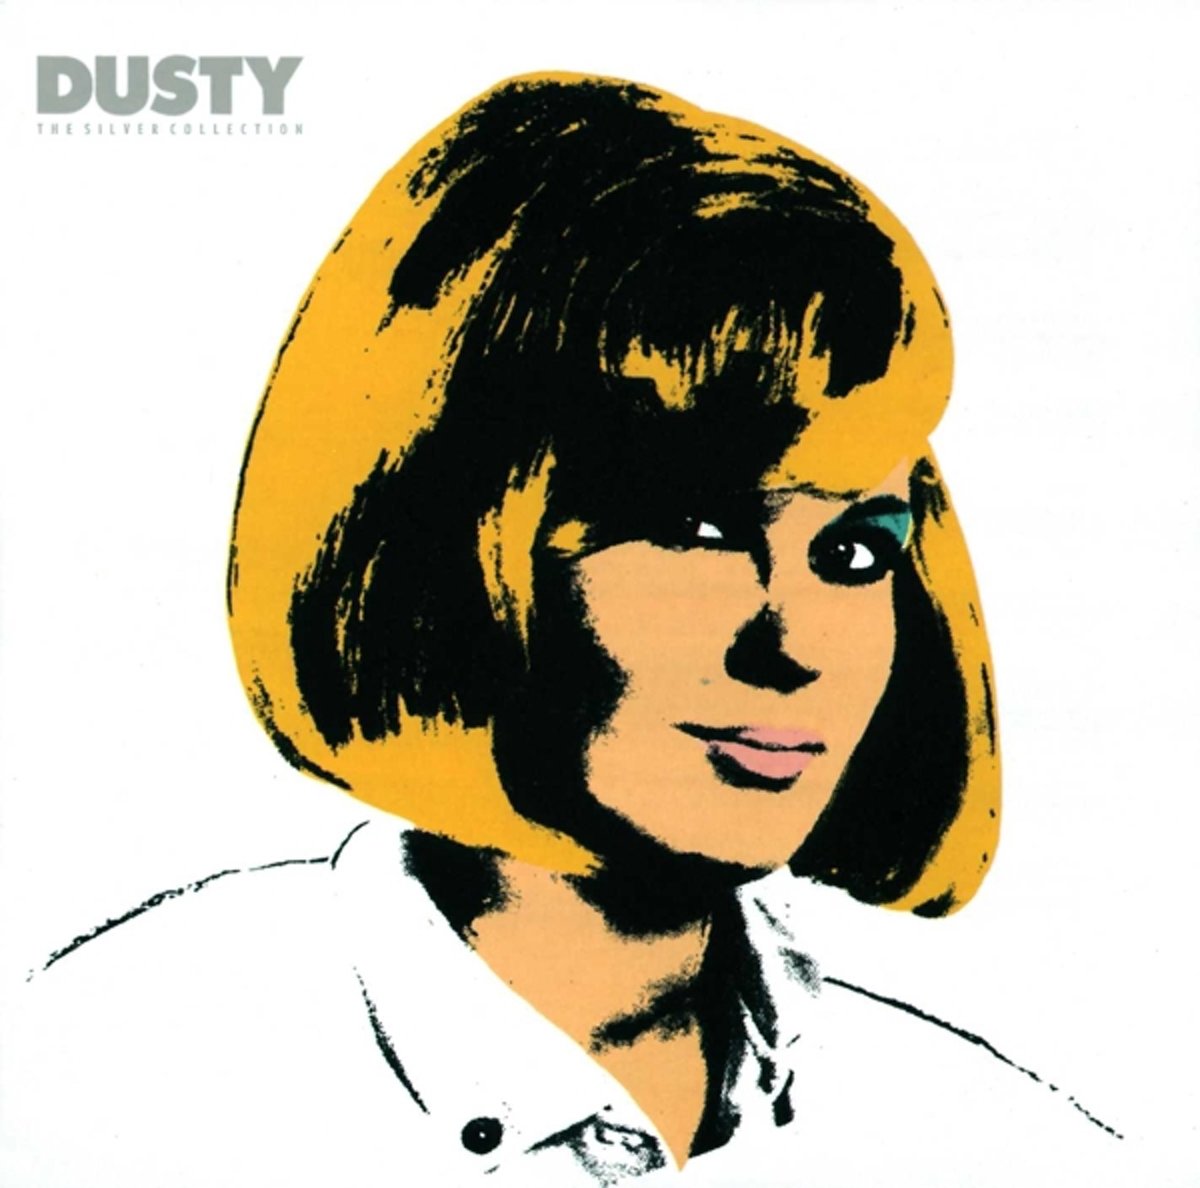 Dusty - The Silver Collection | Dusty Springfield